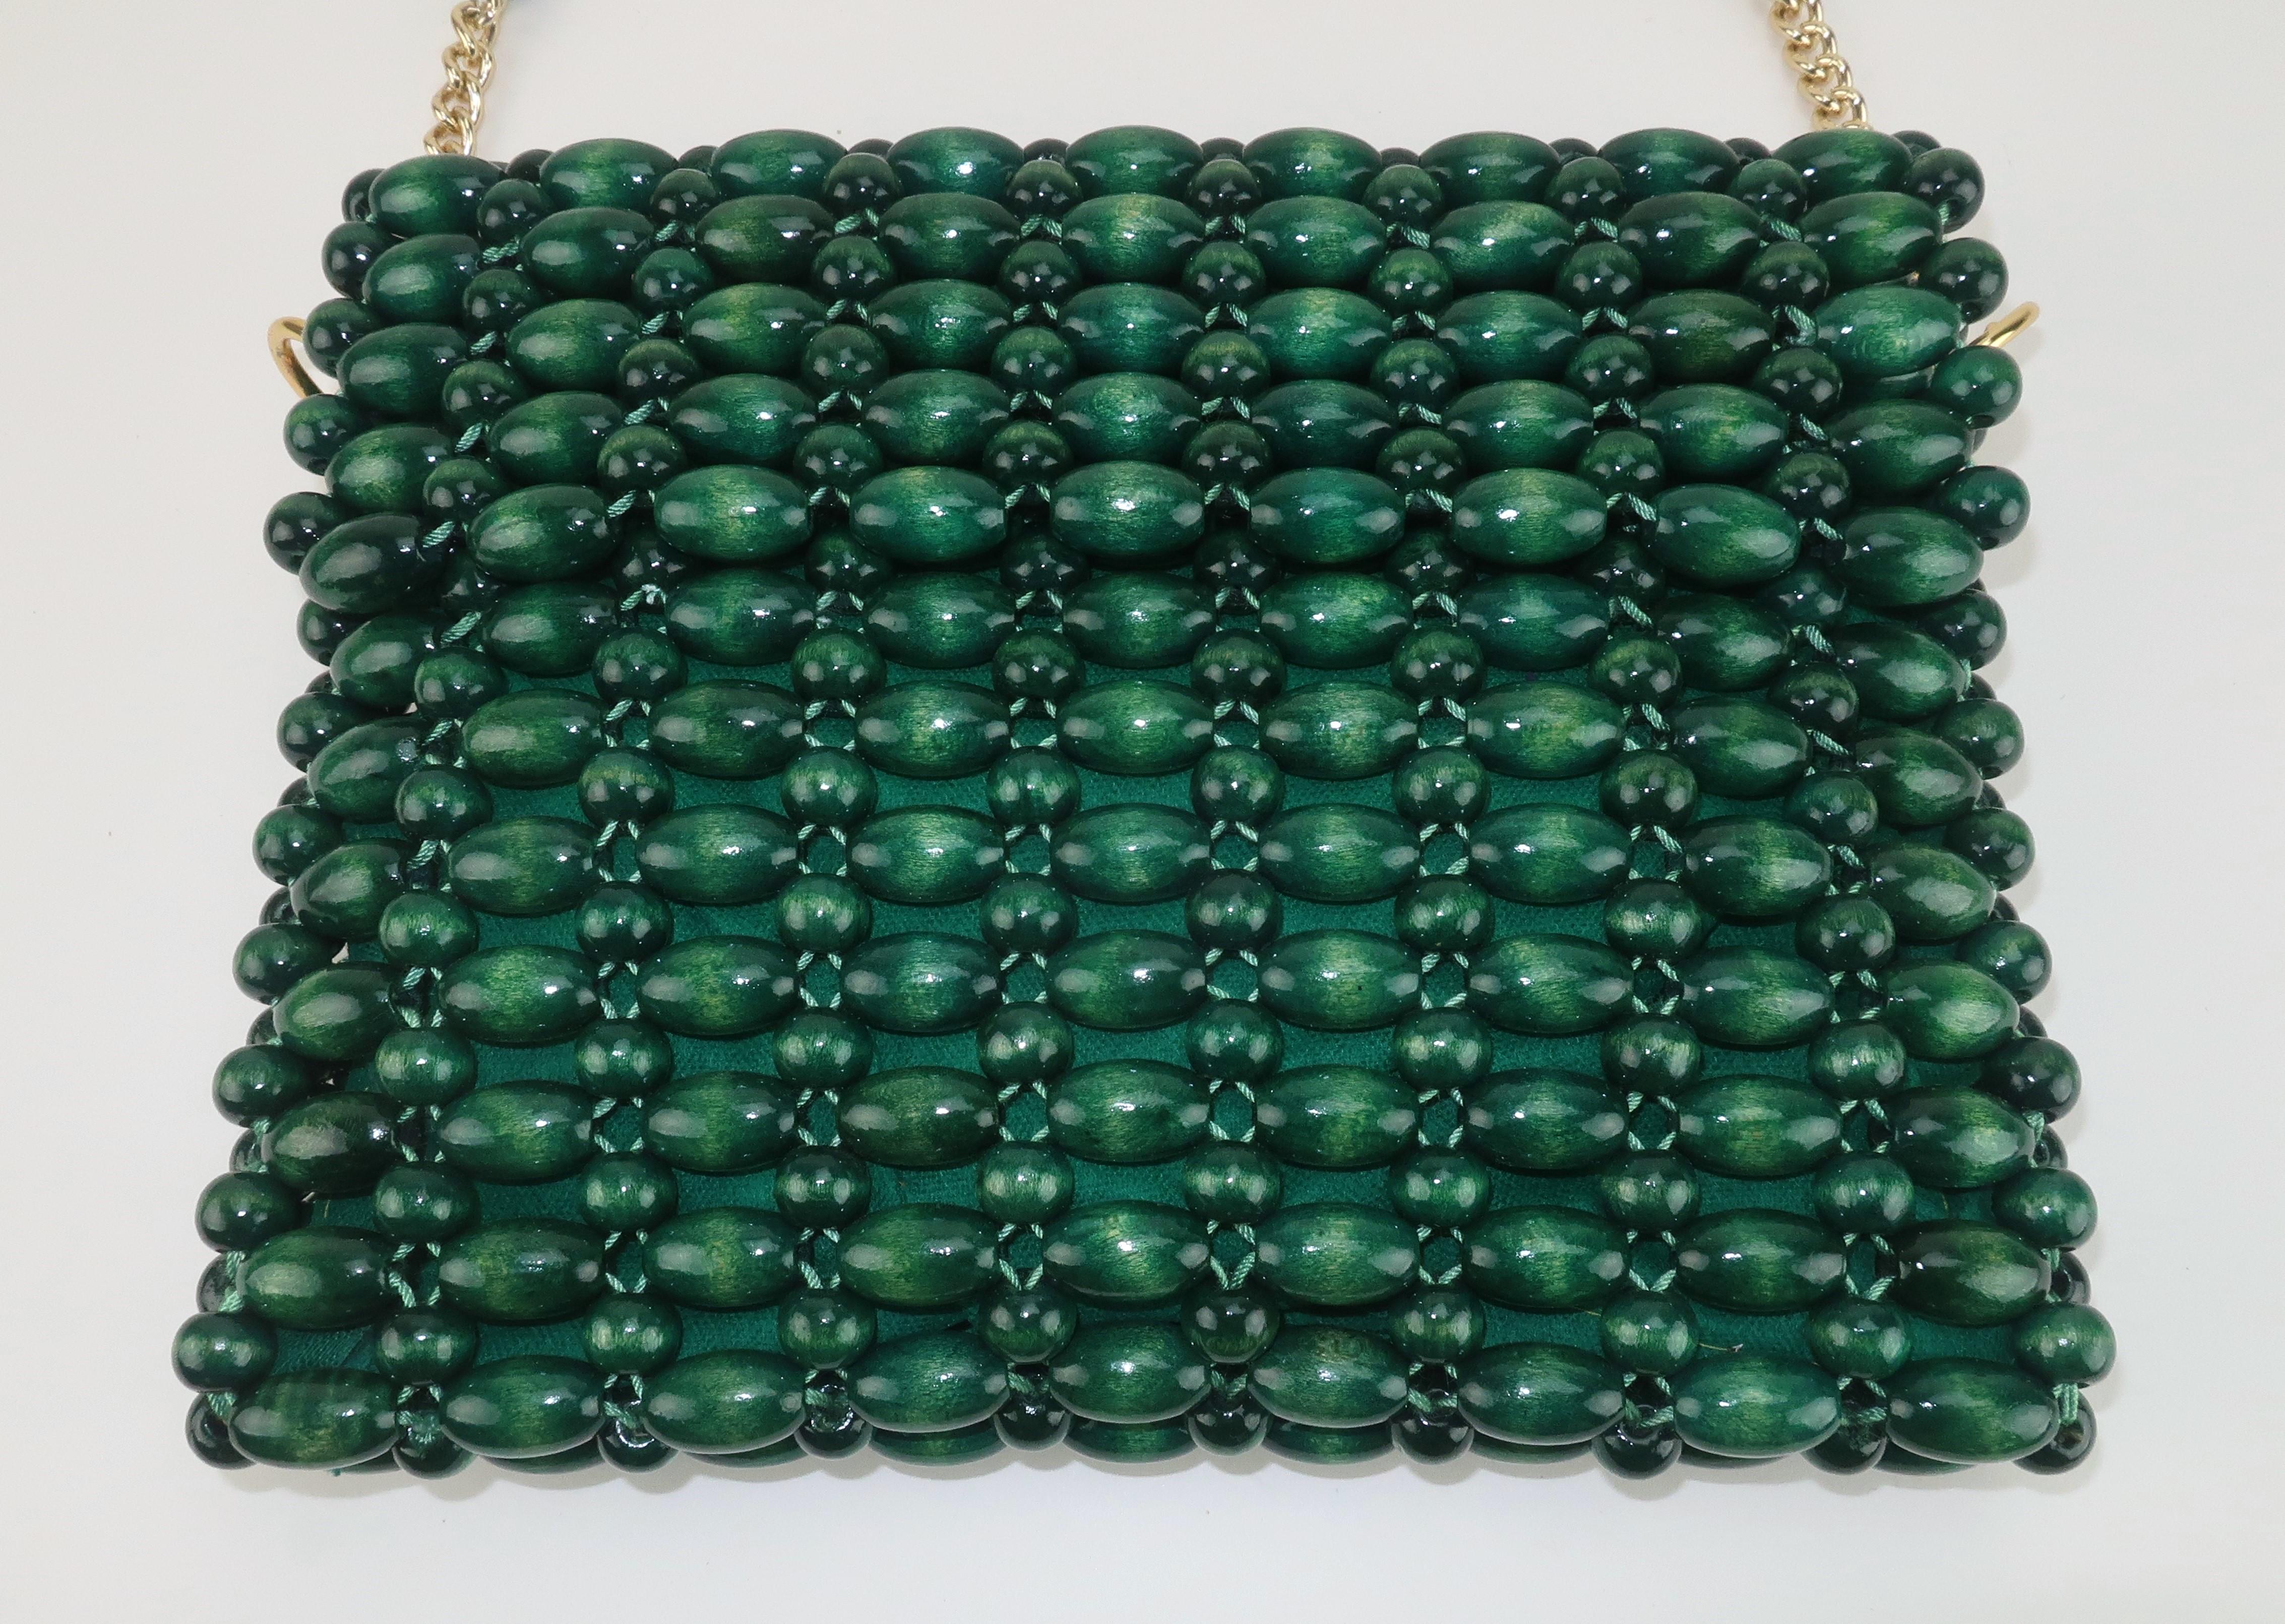 Mod 1960's wooden bead handbag in a rich emerald green.  The shoulder length handle has gold chain accents for a little touch of glam to this otherwise bohemian chic look.  The front flap flips back to expose a zipper closure and a felt lined